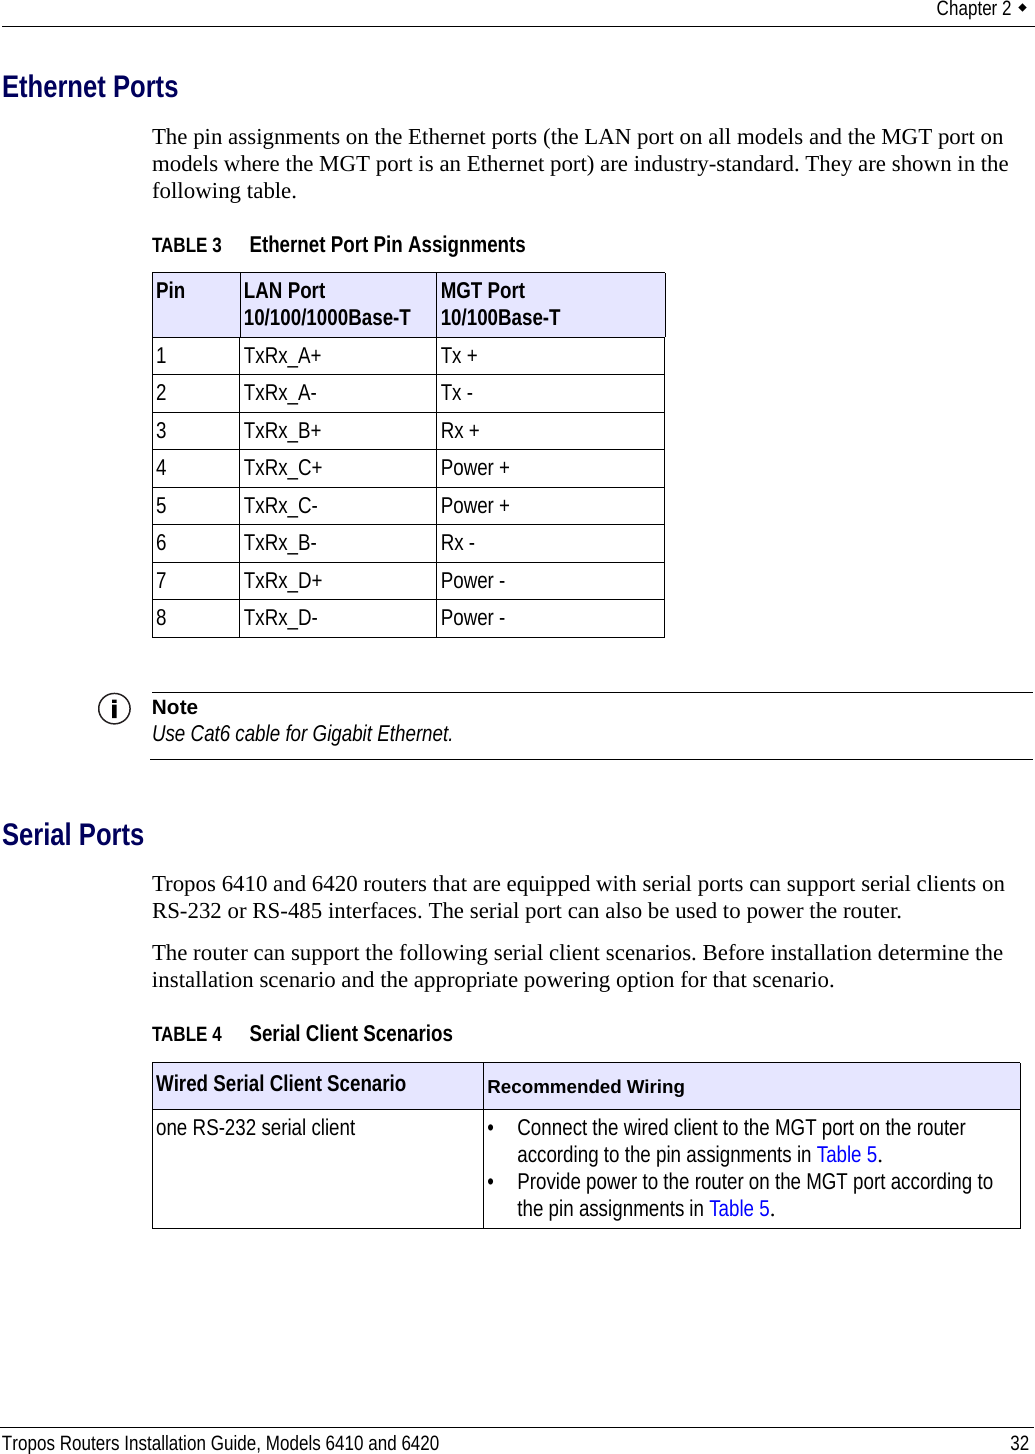 Chapter 2  Tropos Routers Installation Guide, Models 6410 and 6420 32Ethernet PortsThe pin assignments on the Ethernet ports (the LAN port on all models and the MGT port on models where the MGT port is an Ethernet port) are industry-standard. They are shown in the following table.NoteUse Cat6 cable for Gigabit Ethernet.Serial PortsTropos 6410 and 6420 routers that are equipped with serial ports can support serial clients on RS-232 or RS-485 interfaces. The serial port can also be used to power the router. The router can support the following serial client scenarios. Before installation determine the installation scenario and the appropriate powering option for that scenario.TABLE 3 Ethernet Port Pin AssignmentsPin LAN Port10/100/1000Base-T MGT Port10/100Base-T1 TxRx_A+ Tx +2 TxRx_A- Tx -3 TxRx_B+ Rx +4 TxRx_C+ Power +5 TxRx_C- Power +6 TxRx_B- Rx - 7 TxRx_D+ Power -8 TxRx_D- Power -TABLE 4 Serial Client ScenariosWired Serial Client Scenario Recommended Wiringone RS-232 serial client • Connect the wired client to the MGT port on the router according to the pin assignments in Table 5.• Provide power to the router on the MGT port according to the pin assignments in Table 5.